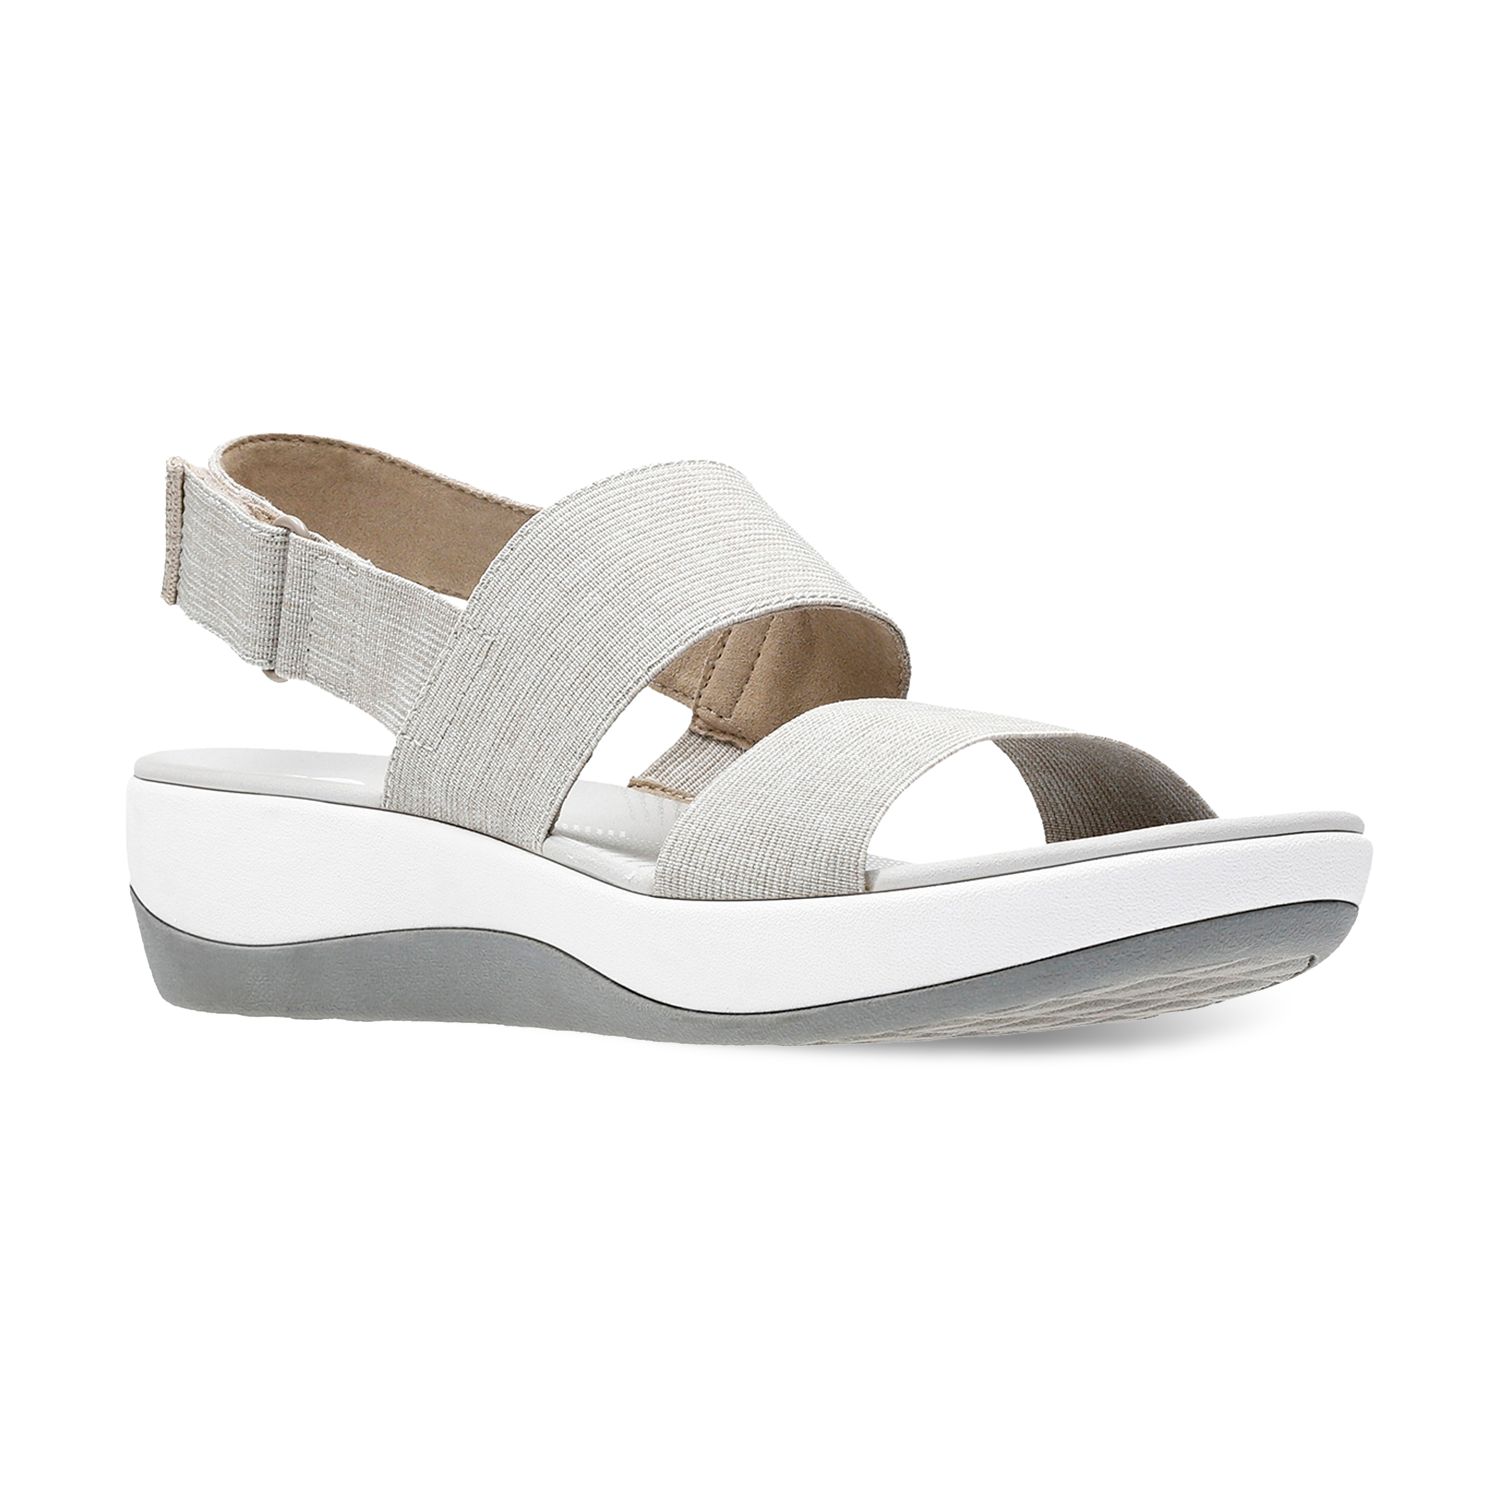 cloudsteppers sandals by clarks